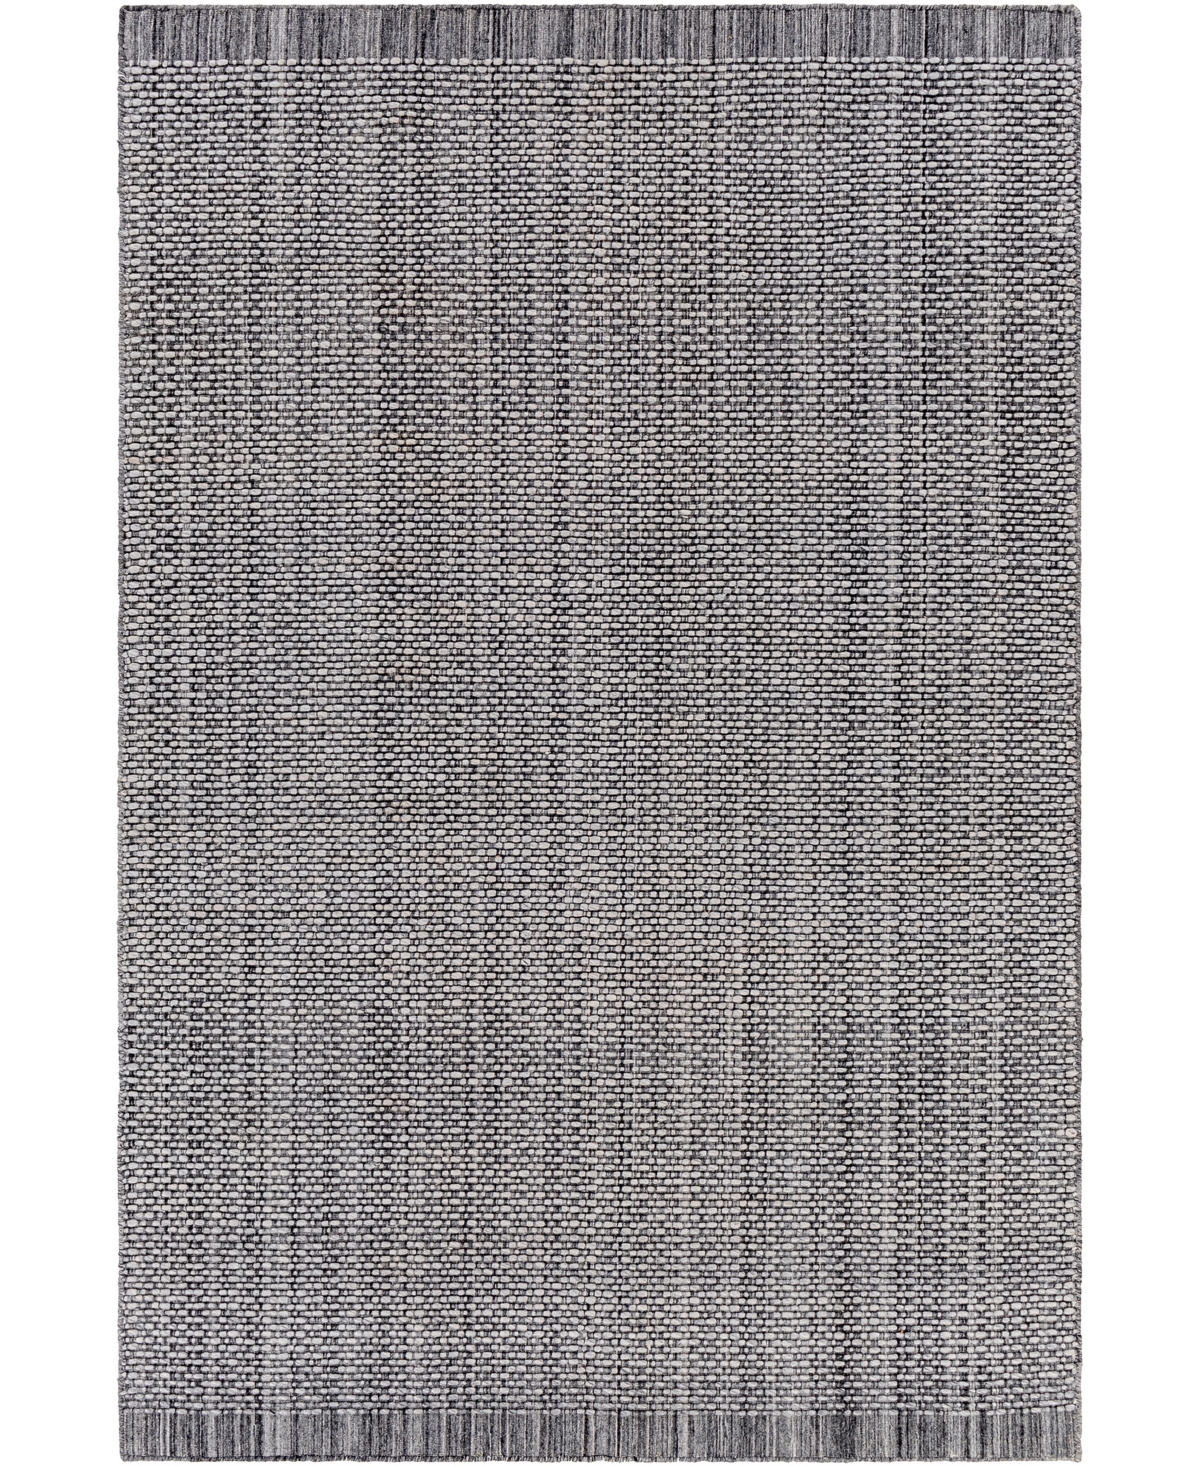 Surya Sycamore Syc-2303 5in x 7'6in Outdoor Area Rug - Charcoal